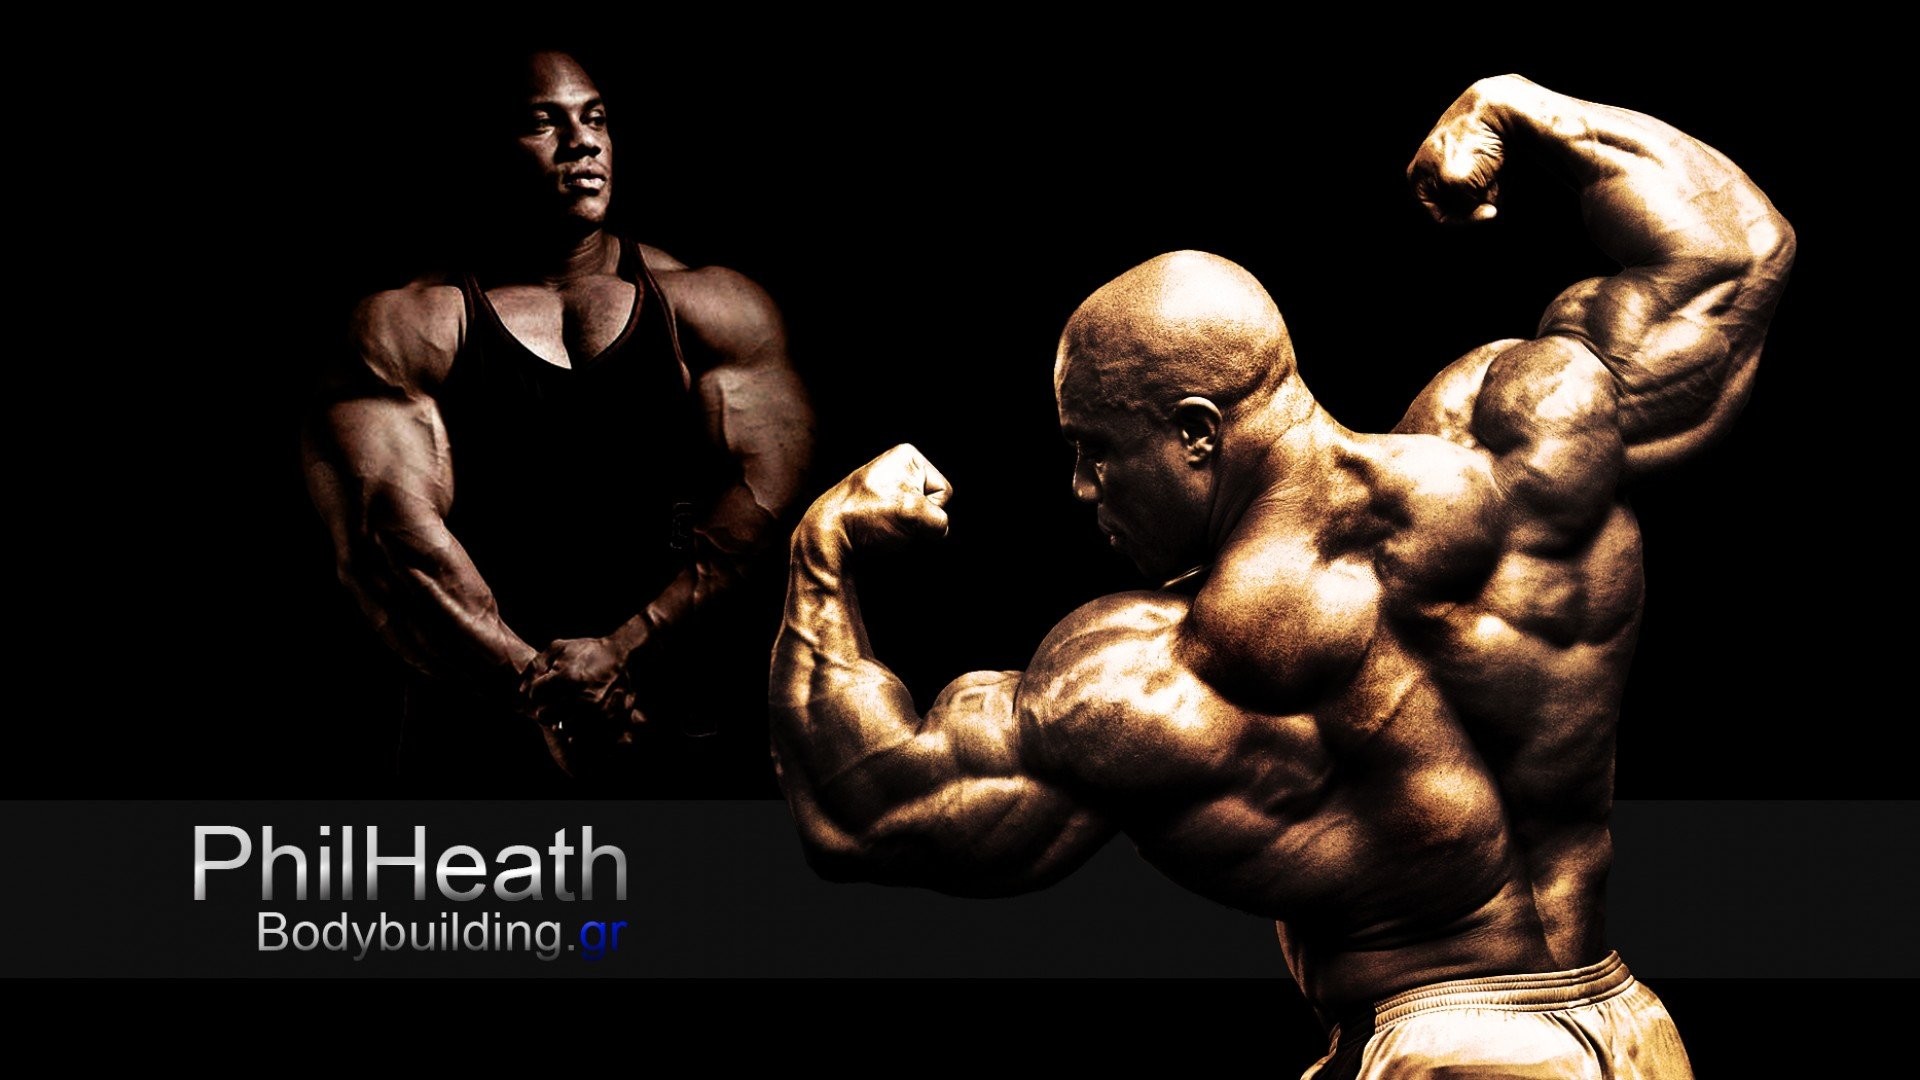 1920x1080 Body-building fitness muscle muscles weight lifting Bodybuilding (70)  wallpaper |  | 415591 | WallpaperUP